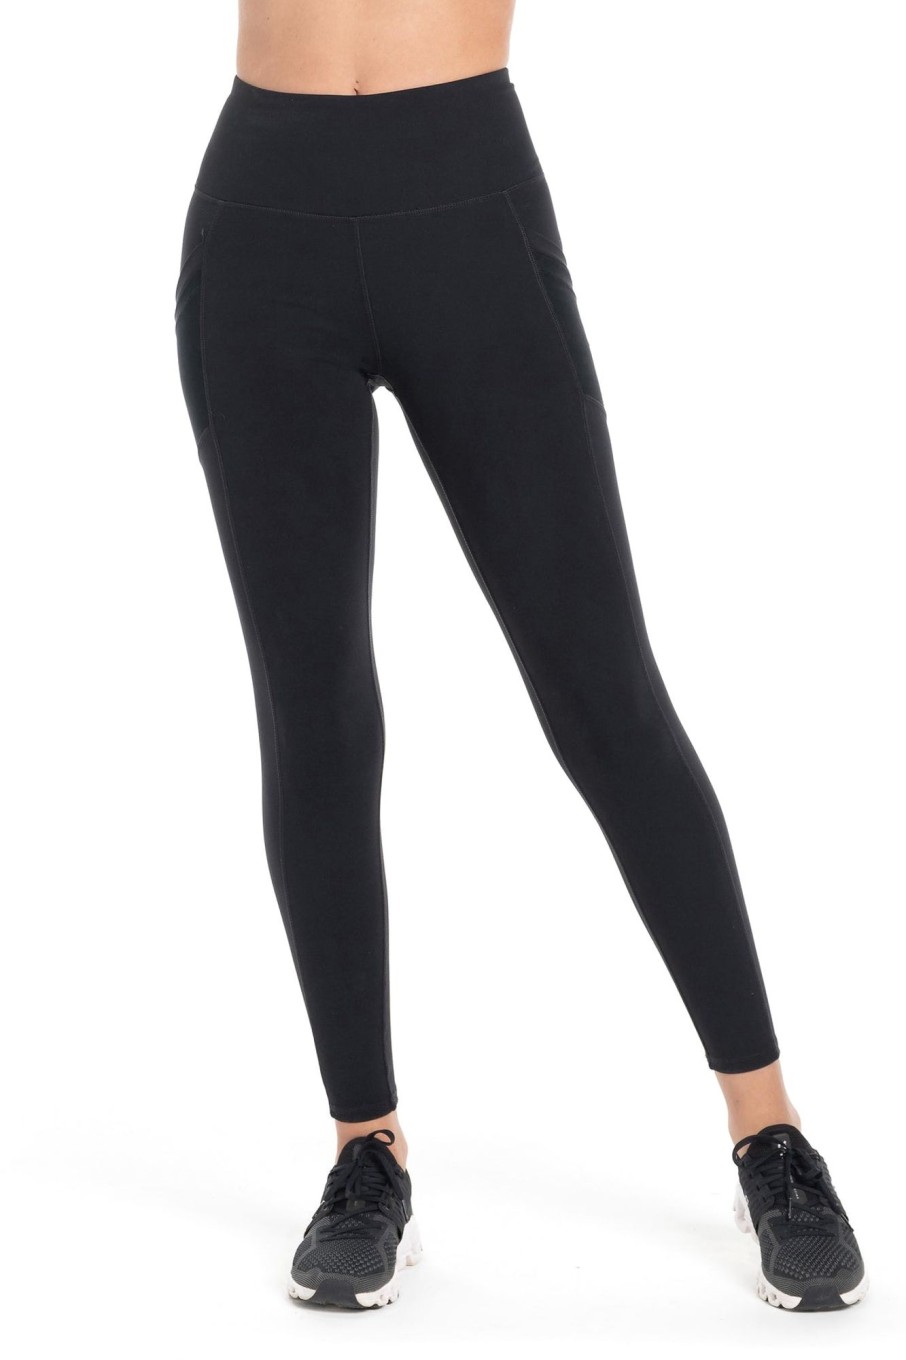 Kyodan Womens Simple Basic Workout Yoga Leggings with Pockets - X